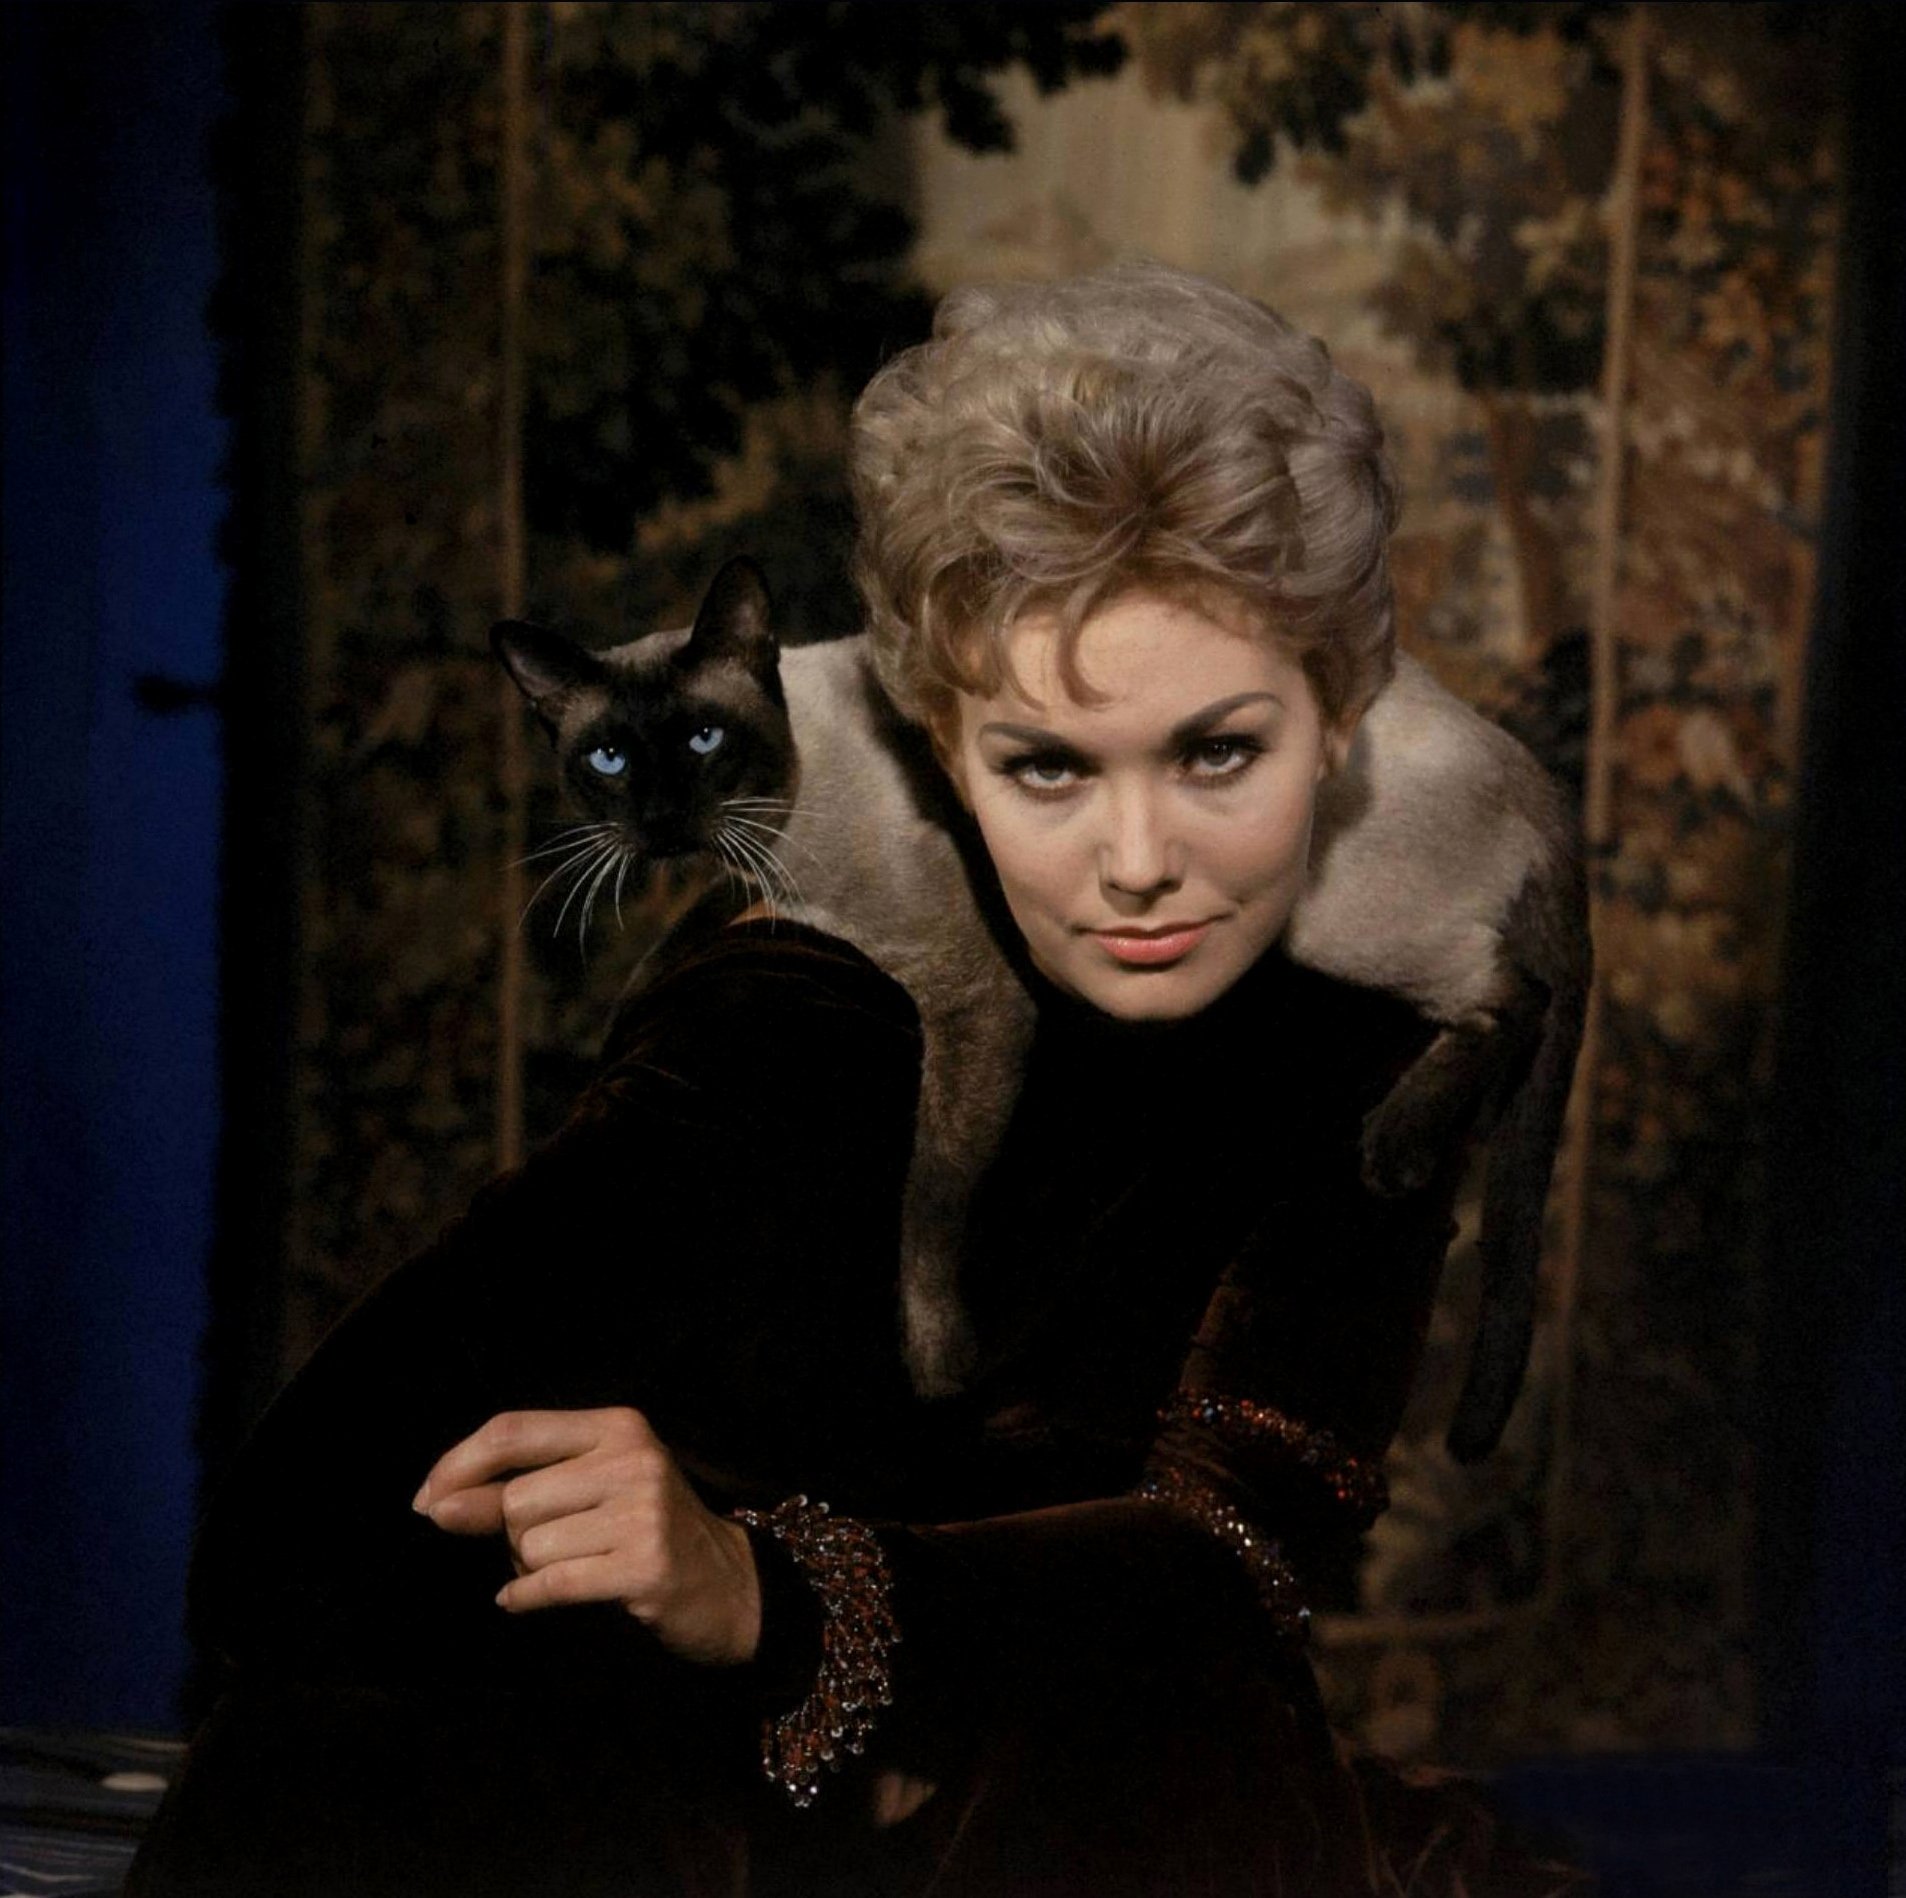 Happy Birthday to Kim Novak, star of one of my favorite comedies, BELL, BOOK AND CANDLE. 